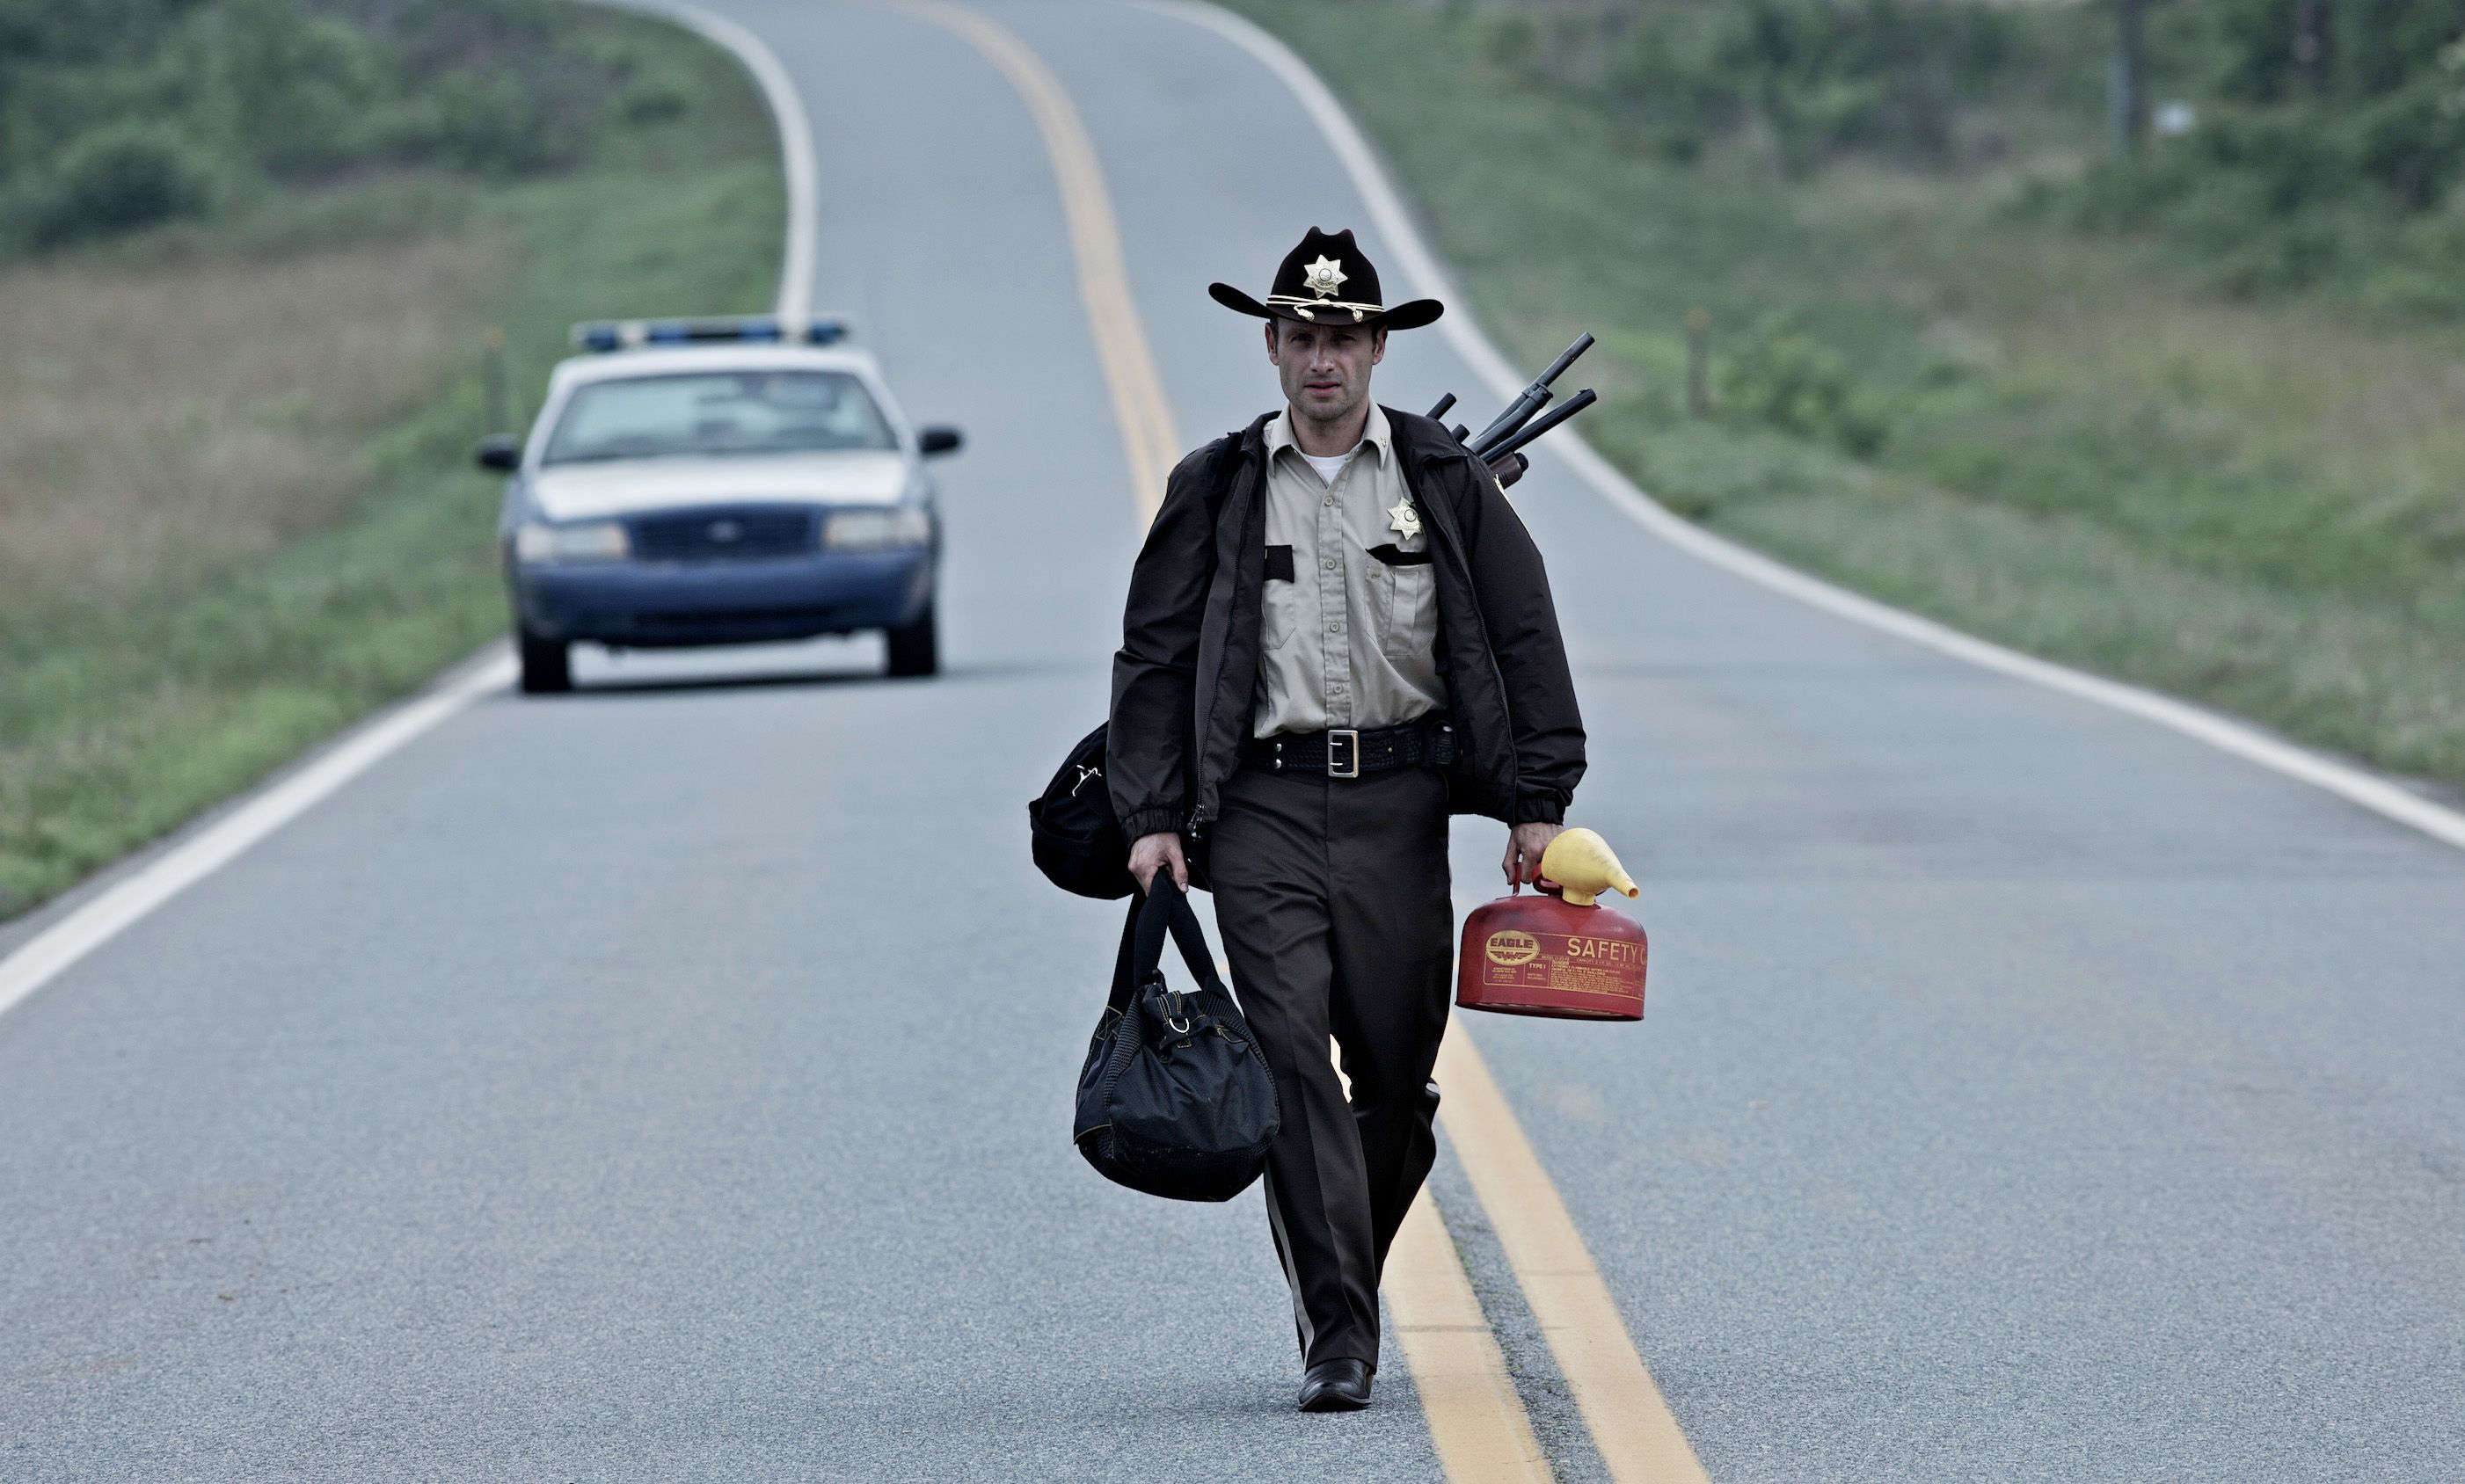 The Walking Dead pilot Andrew Lincoln as Rick Grimes on the highway